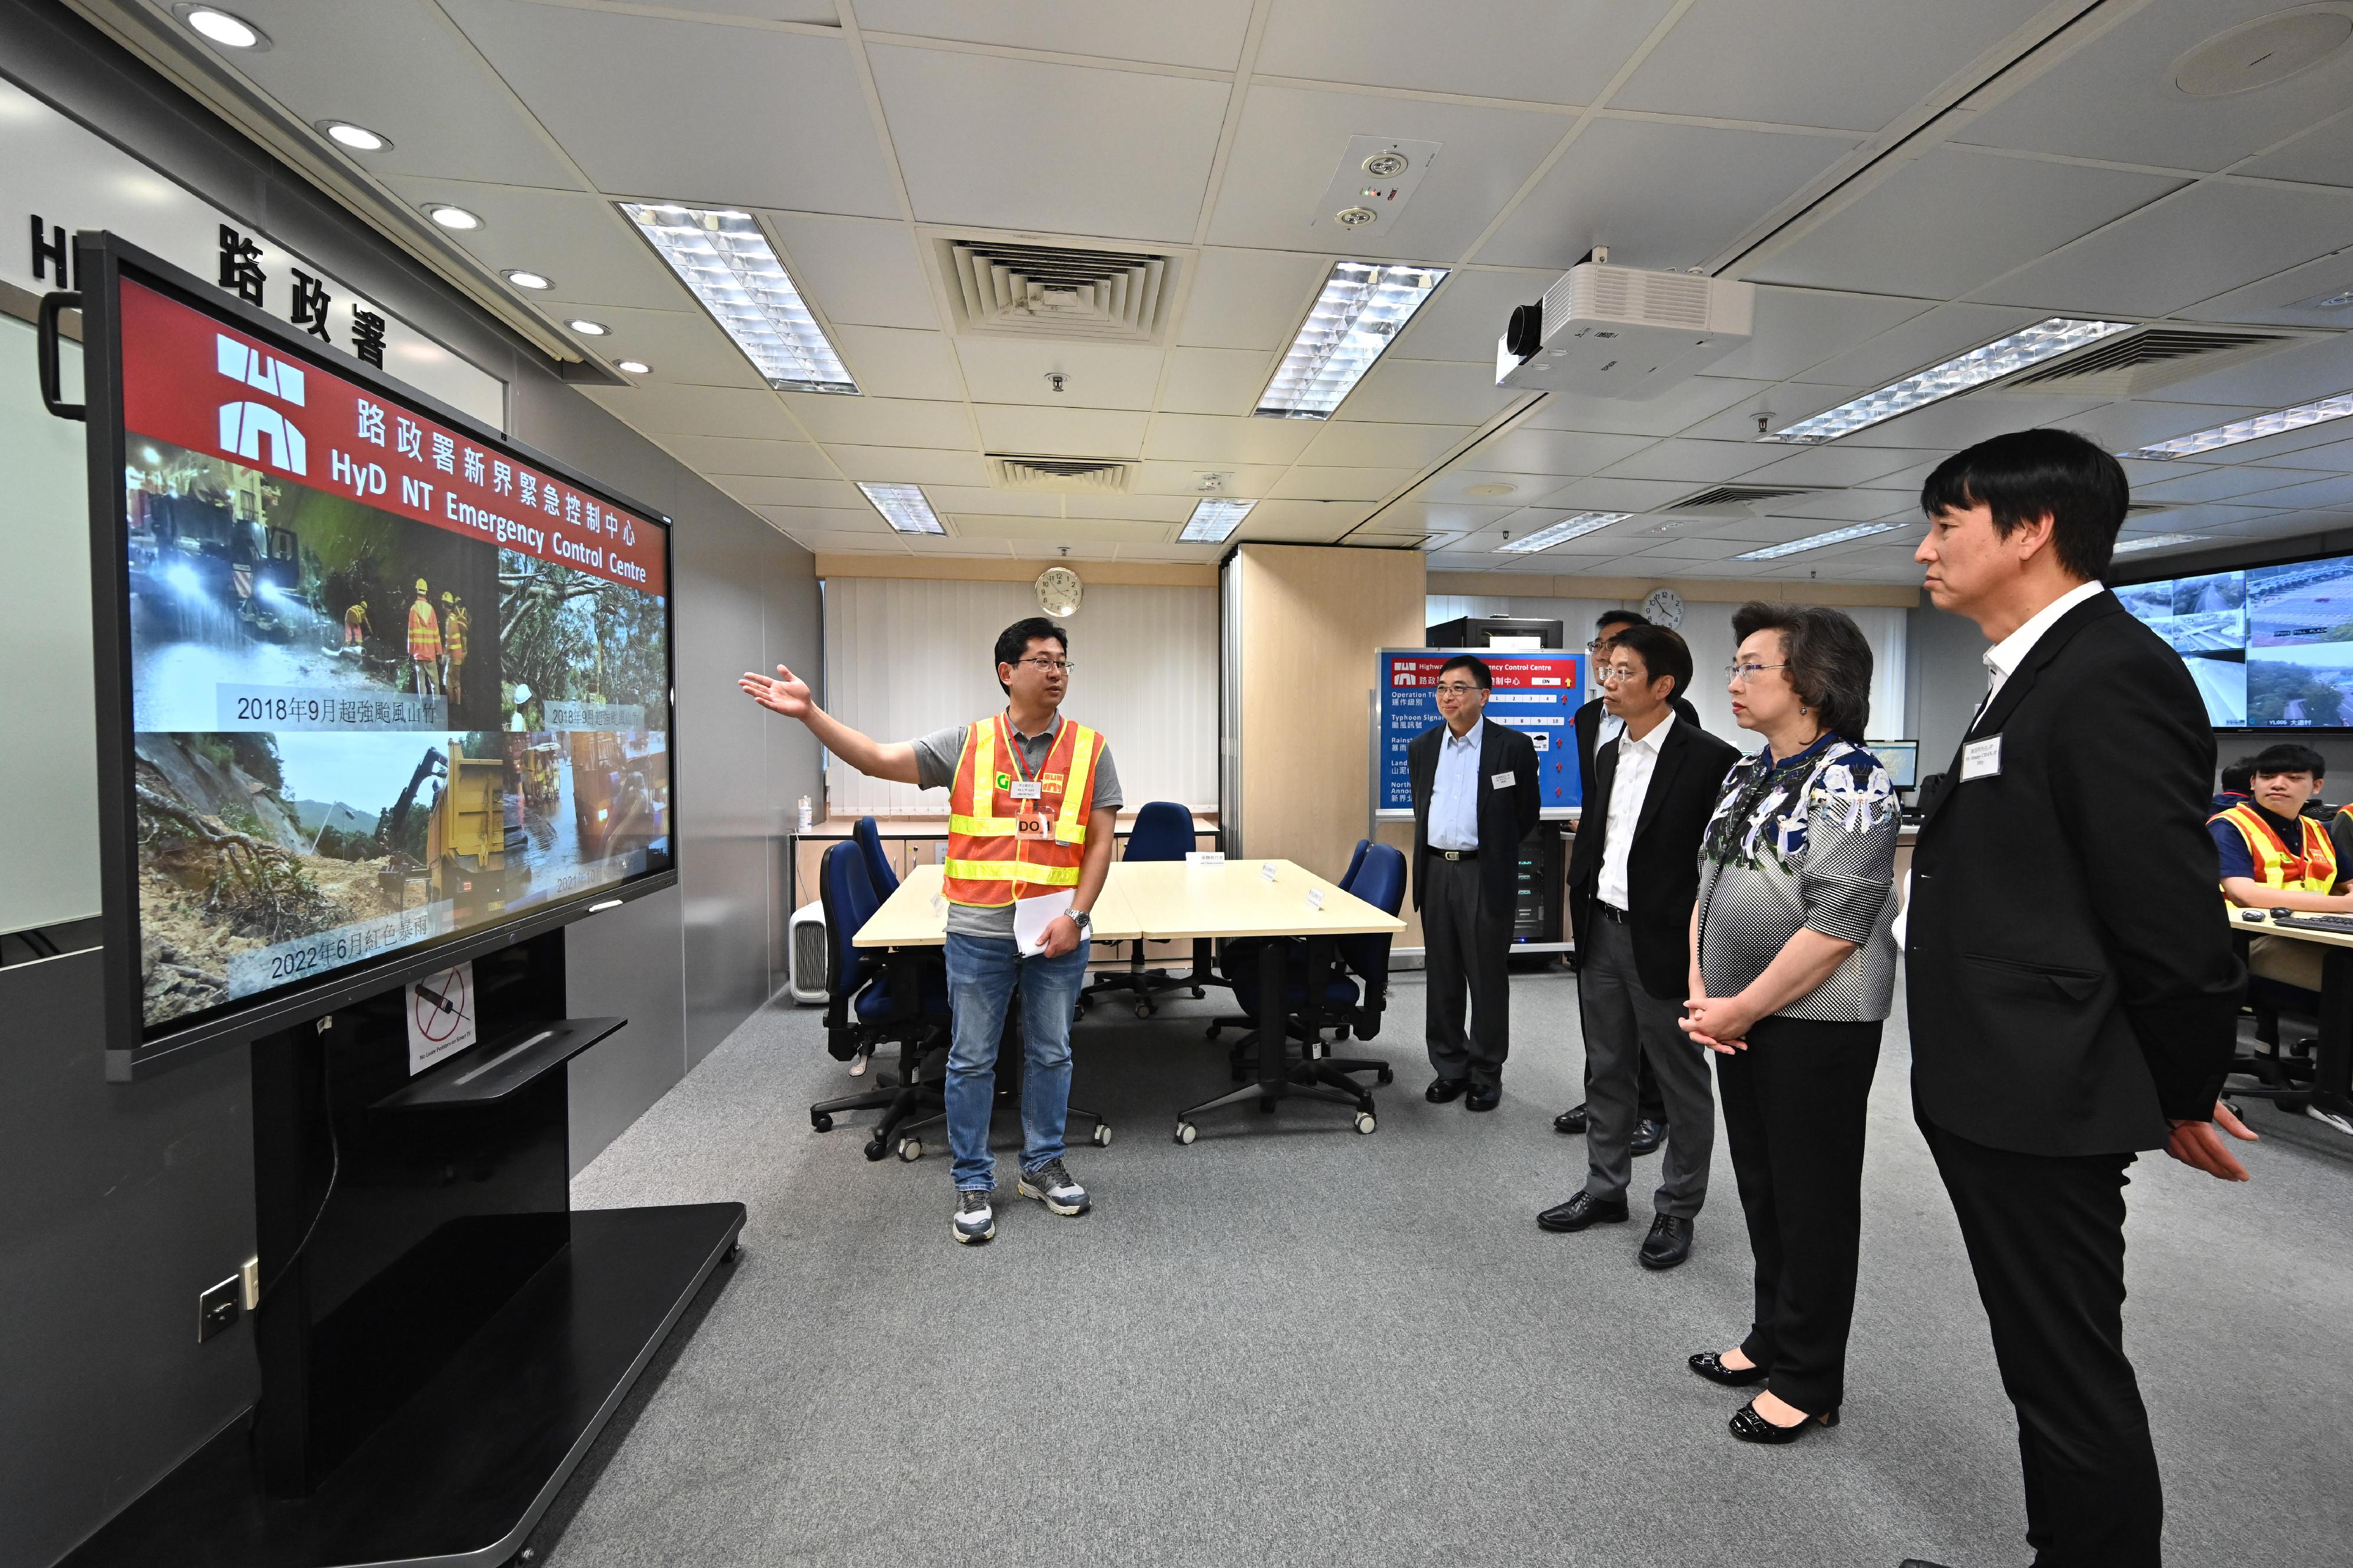 The Secretary for the Civil Service, Mrs Ingrid Yeung, visited the headquarters of the Highways Department today (May 8). Photo shows Mrs Yeung (second right) visiting the New Territories Emergency Control Centre and learning how the Centre co-ordinates with the Emergency Transport Co-ordination Centre of the Transport Department during inclement weather. The Centre was activated when the Red Rainstorm Warning Signal was in force yesterday (May 7). Looking on are the Permanent Secretary for the Civil Service, Mr Clement Leung (third right), and the Director of Highways, Mr Jimmy Chan (first right).